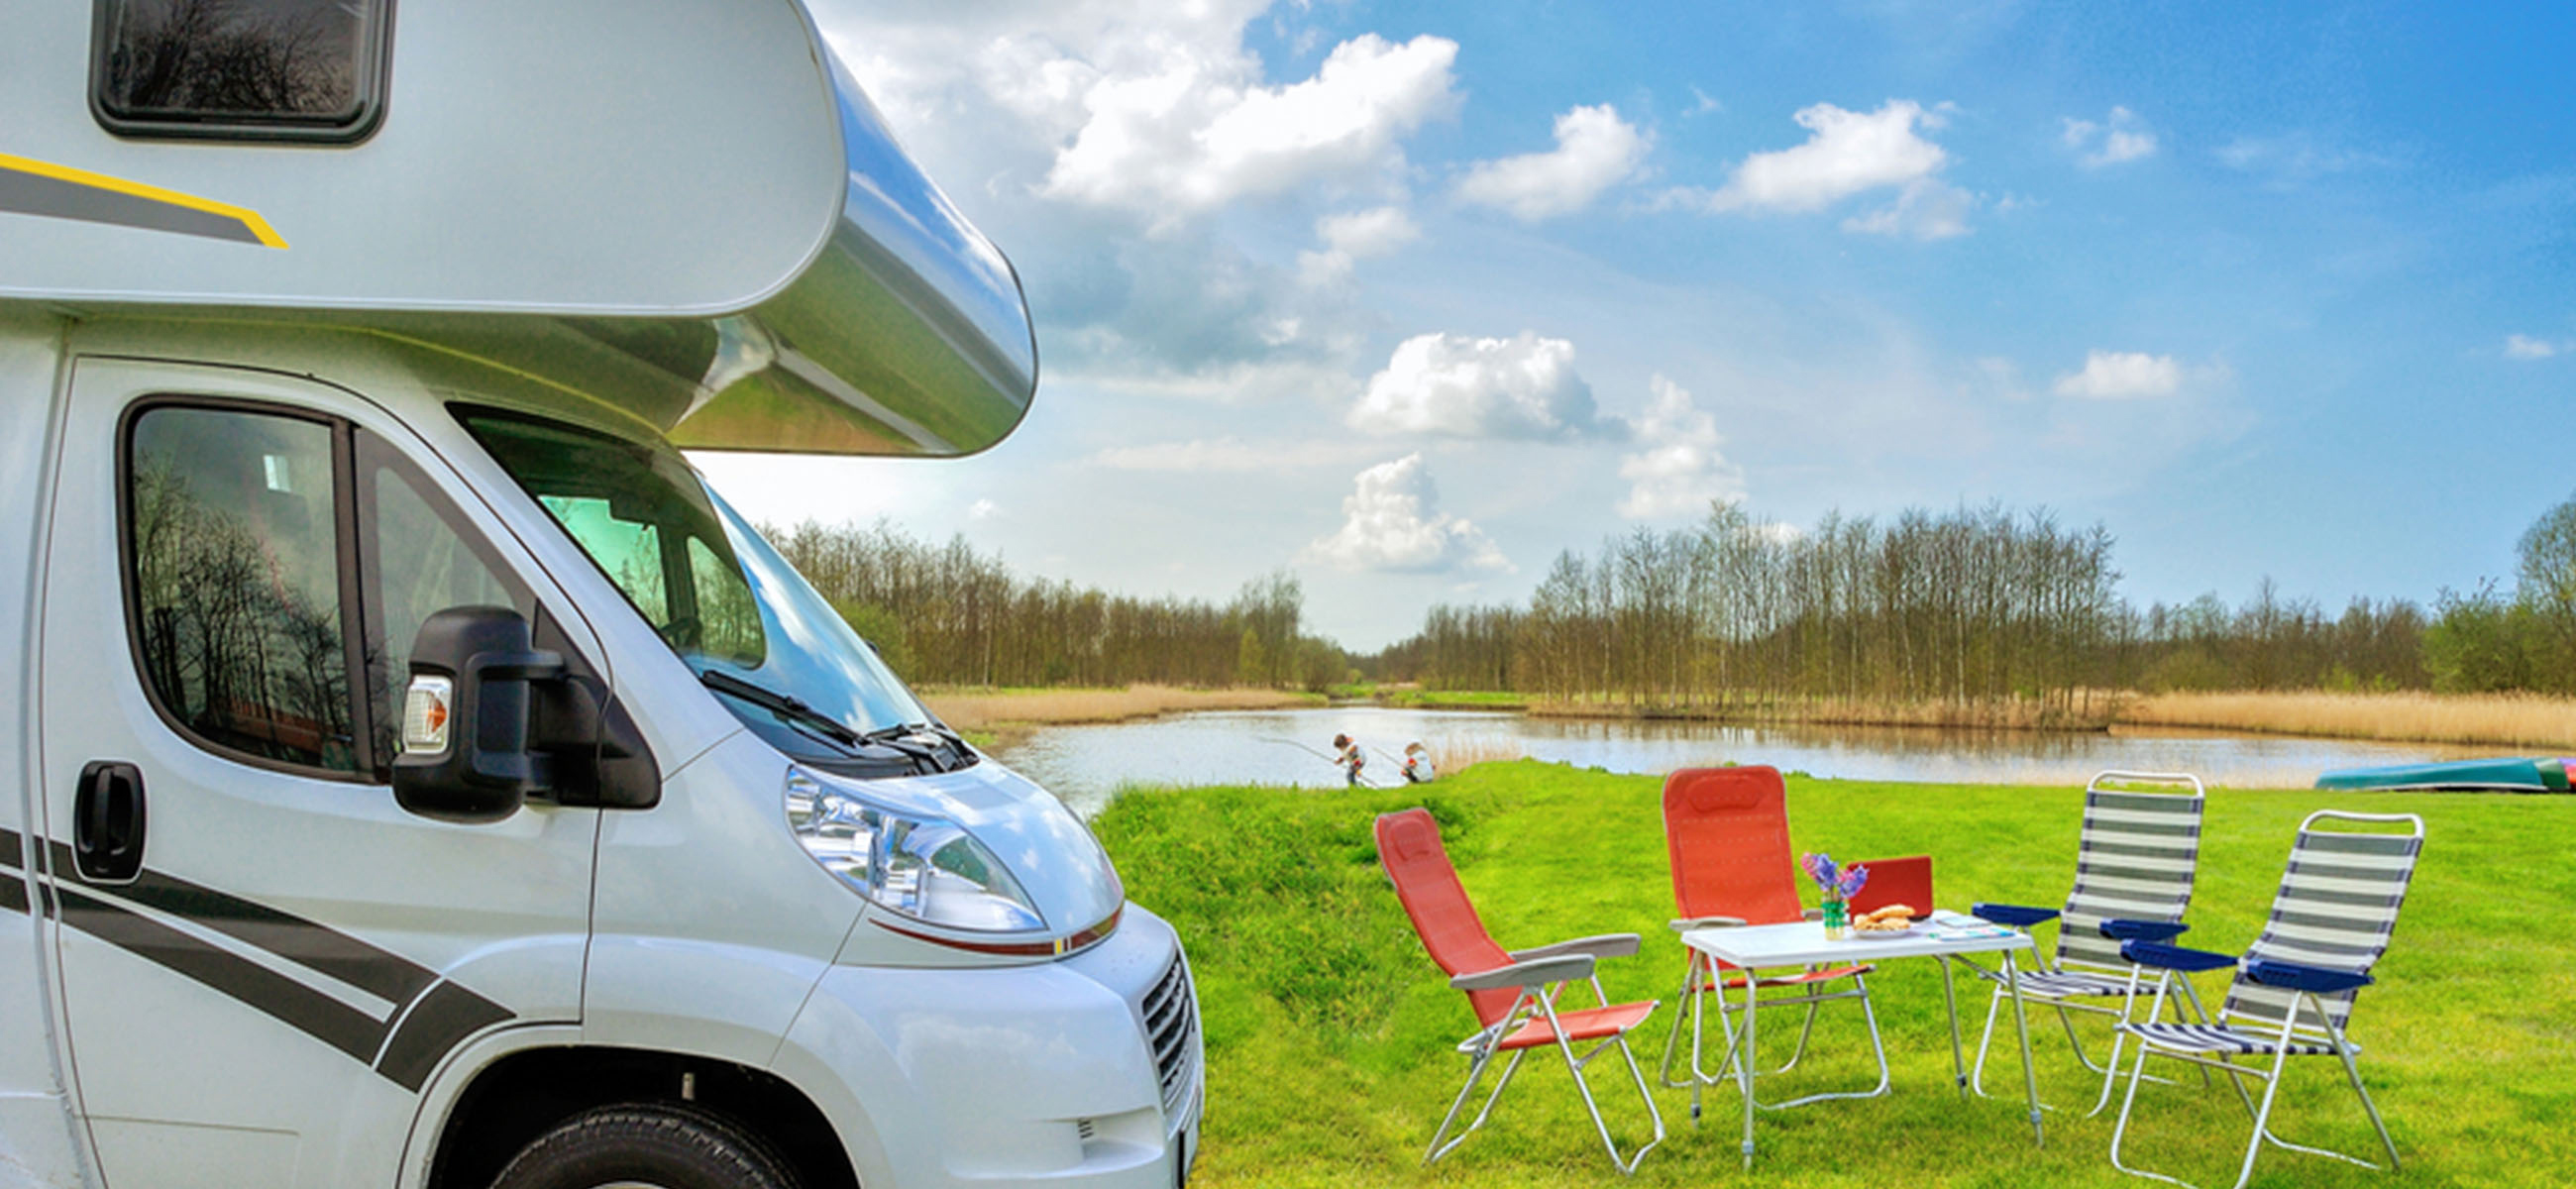 Texas Motor Home Insurance Coverage